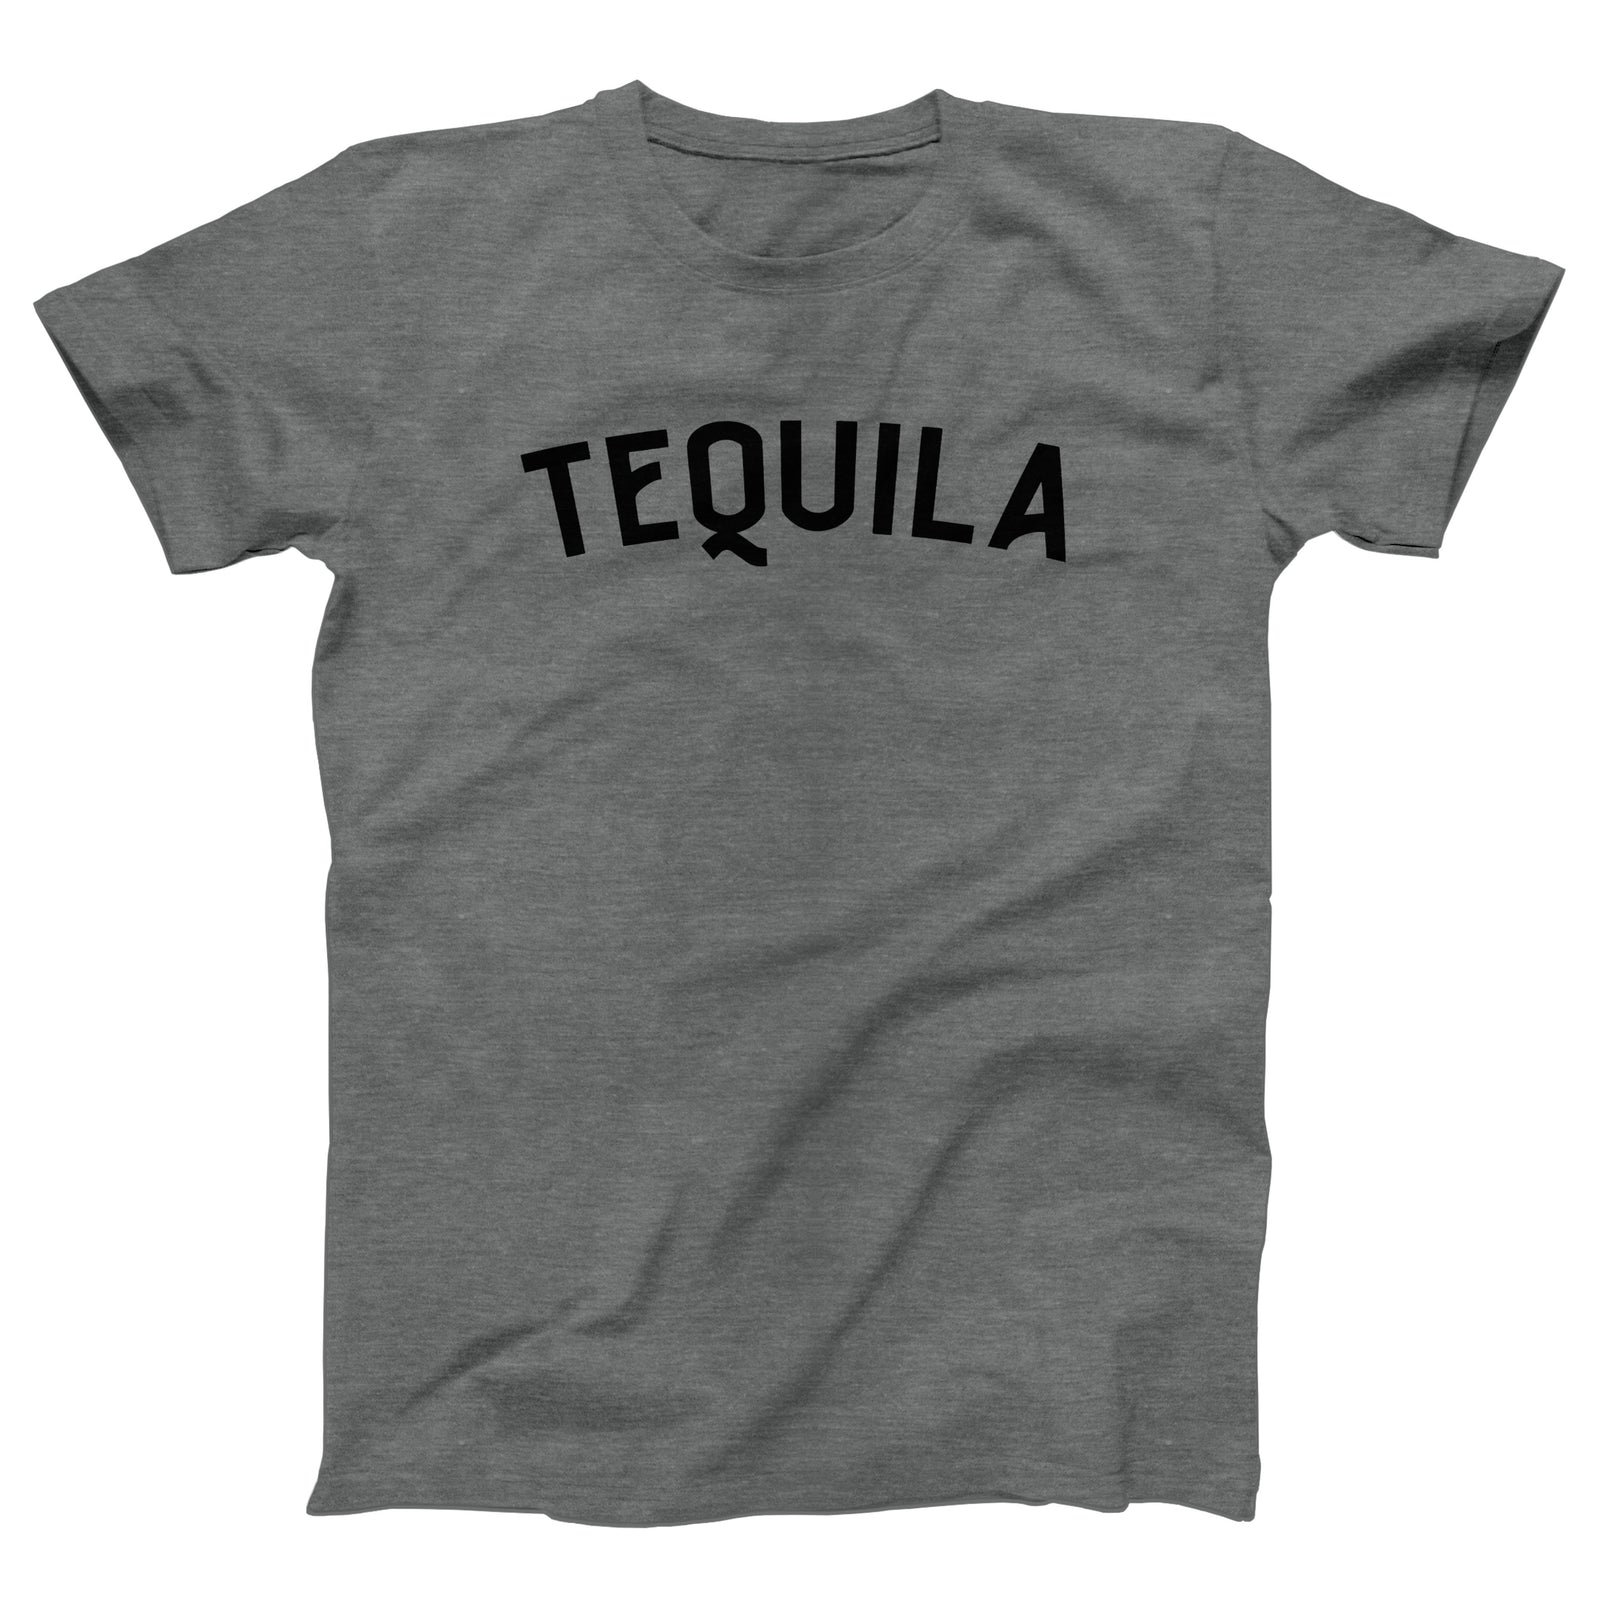 //cdn.shopify.com/s/files/1/0274/2488/2766/products/tequila-menunisex-t-shirt-988437_5000x.jpg?v=1662708880 5000w,
    //cdn.shopify.com/s/files/1/0274/2488/2766/products/tequila-menunisex-t-shirt-988437_4500x.jpg?v=1662708880 4500w,
    //cdn.shopify.com/s/files/1/0274/2488/2766/products/tequila-menunisex-t-shirt-988437_4000x.jpg?v=1662708880 4000w,
    //cdn.shopify.com/s/files/1/0274/2488/2766/products/tequila-menunisex-t-shirt-988437_3500x.jpg?v=1662708880 3500w,
    //cdn.shopify.com/s/files/1/0274/2488/2766/products/tequila-menunisex-t-shirt-988437_3000x.jpg?v=1662708880 3000w,
    //cdn.shopify.com/s/files/1/0274/2488/2766/products/tequila-menunisex-t-shirt-988437_2500x.jpg?v=1662708880 2500w,
    //cdn.shopify.com/s/files/1/0274/2488/2766/products/tequila-menunisex-t-shirt-988437_2000x.jpg?v=1662708880 2000w,
    //cdn.shopify.com/s/files/1/0274/2488/2766/products/tequila-menunisex-t-shirt-988437_1800x.jpg?v=1662708880 1800w,
    //cdn.shopify.com/s/files/1/0274/2488/2766/products/tequila-menunisex-t-shirt-988437_1600x.jpg?v=1662708880 1600w,
    //cdn.shopify.com/s/files/1/0274/2488/2766/products/tequila-menunisex-t-shirt-988437_1400x.jpg?v=1662708880 1400w,
    //cdn.shopify.com/s/files/1/0274/2488/2766/products/tequila-menunisex-t-shirt-988437_1200x.jpg?v=1662708880 1200w,
    //cdn.shopify.com/s/files/1/0274/2488/2766/products/tequila-menunisex-t-shirt-988437_1000x.jpg?v=1662708880 1000w,
    //cdn.shopify.com/s/files/1/0274/2488/2766/products/tequila-menunisex-t-shirt-988437_800x.jpg?v=1662708880 800w,
    //cdn.shopify.com/s/files/1/0274/2488/2766/products/tequila-menunisex-t-shirt-988437_600x.jpg?v=1662708880 600w,
    //cdn.shopify.com/s/files/1/0274/2488/2766/products/tequila-menunisex-t-shirt-988437_400x.jpg?v=1662708880 400w,
    //cdn.shopify.com/s/files/1/0274/2488/2766/products/tequila-menunisex-t-shirt-988437_200x.jpg?v=1662708880 200w